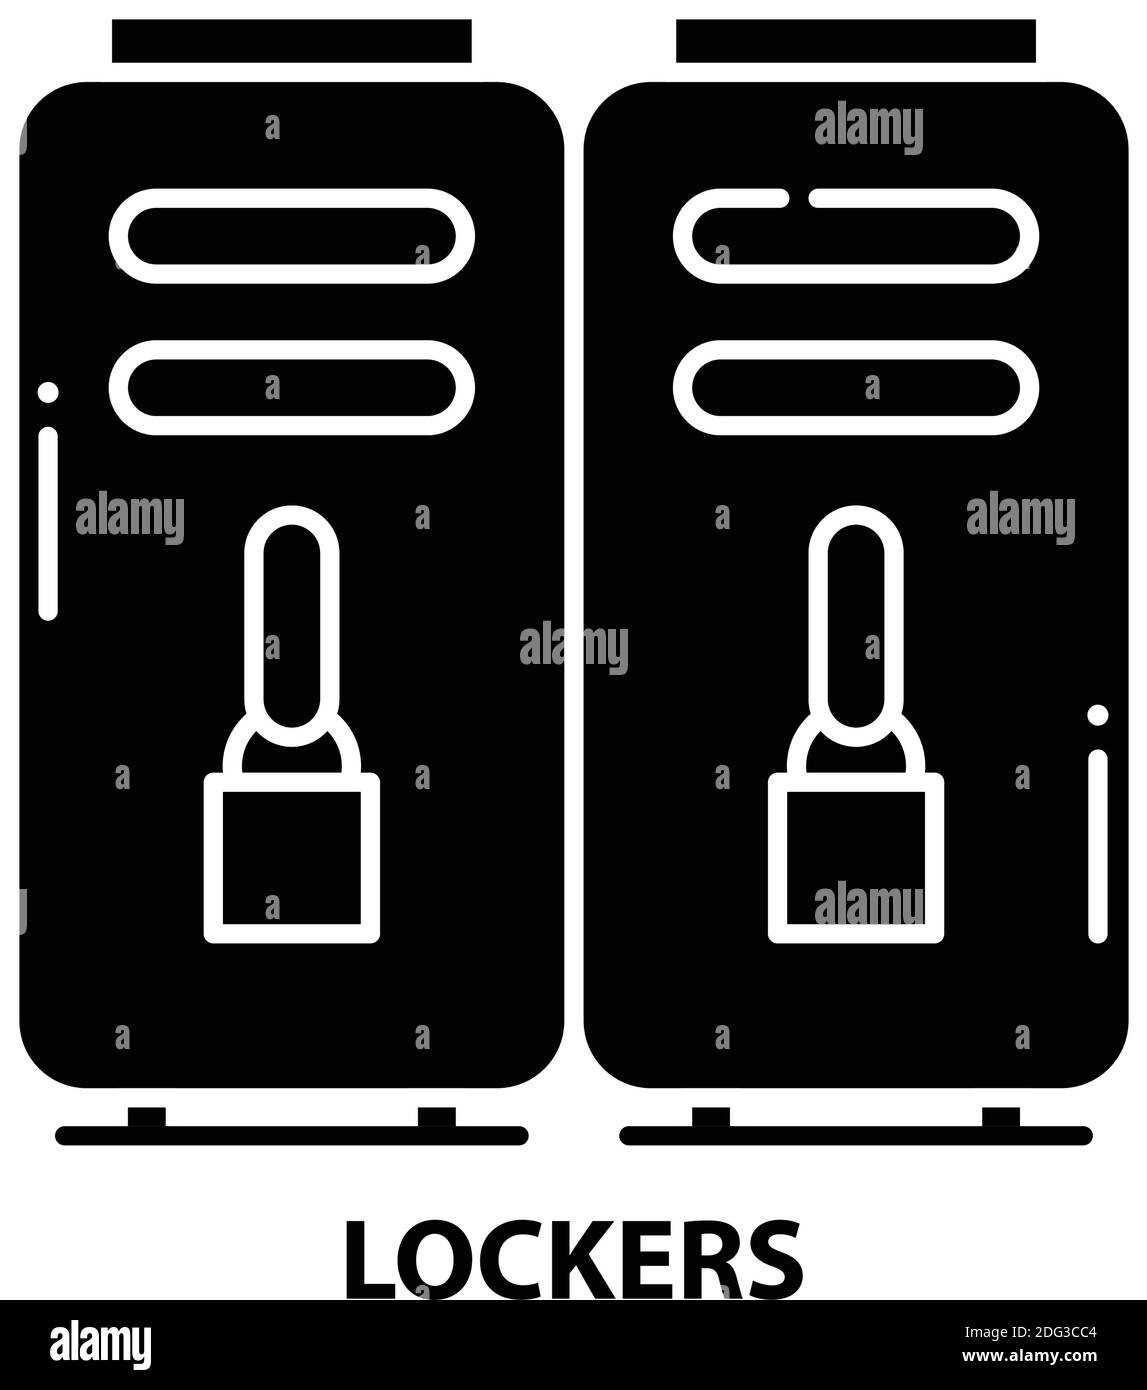 lockers icon, black vector sign with editable strokes, concept illustration Stock Vector